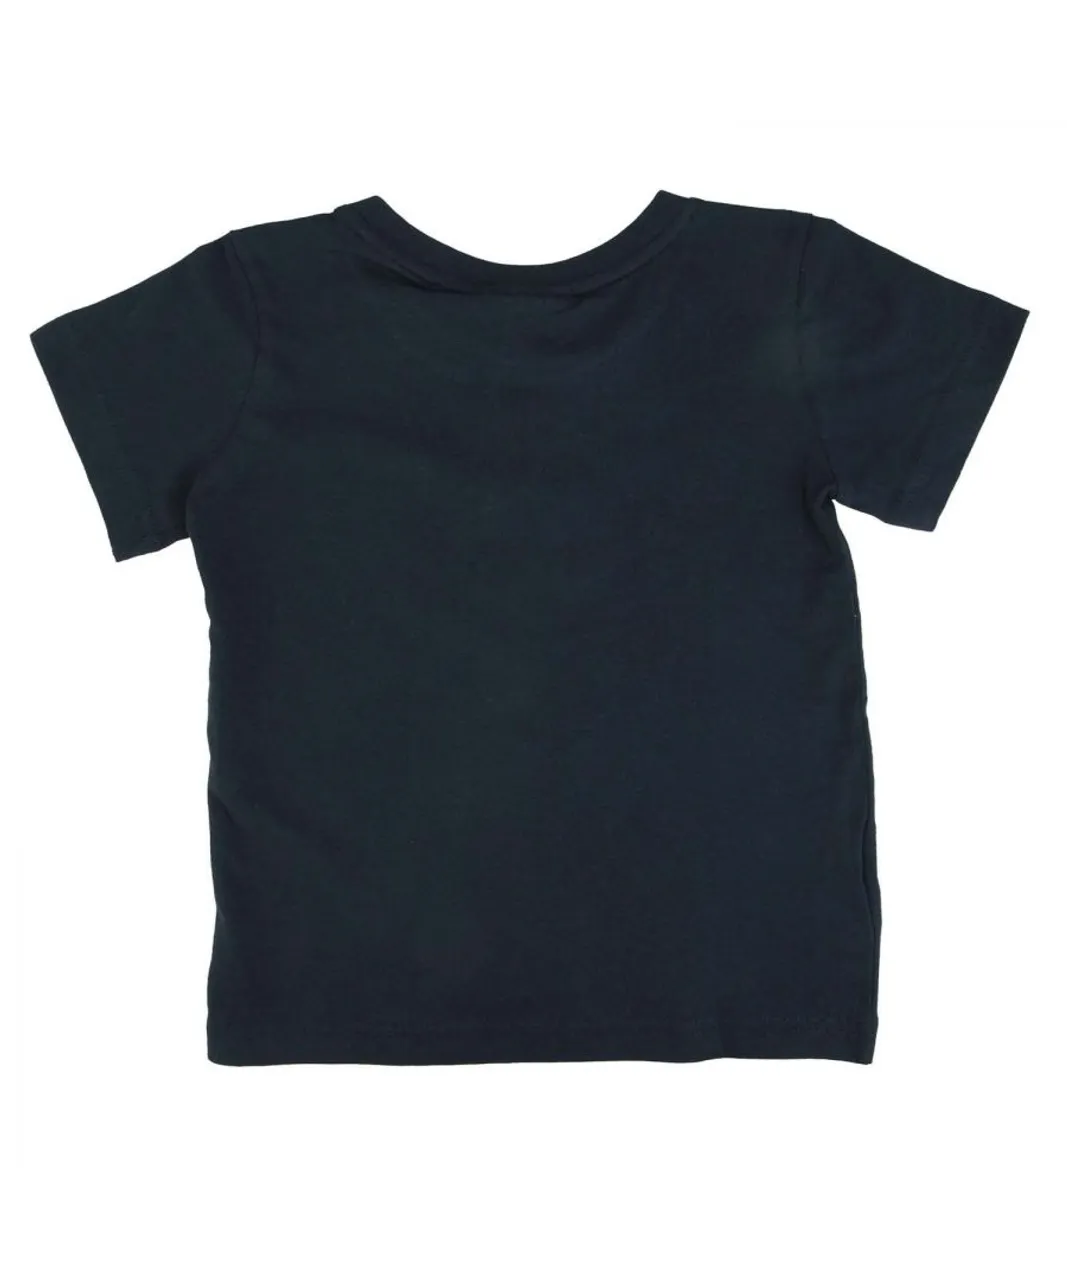 Lacoste Boys Boy's Crew Neck Cotton Jersey T-Shirt in Navy